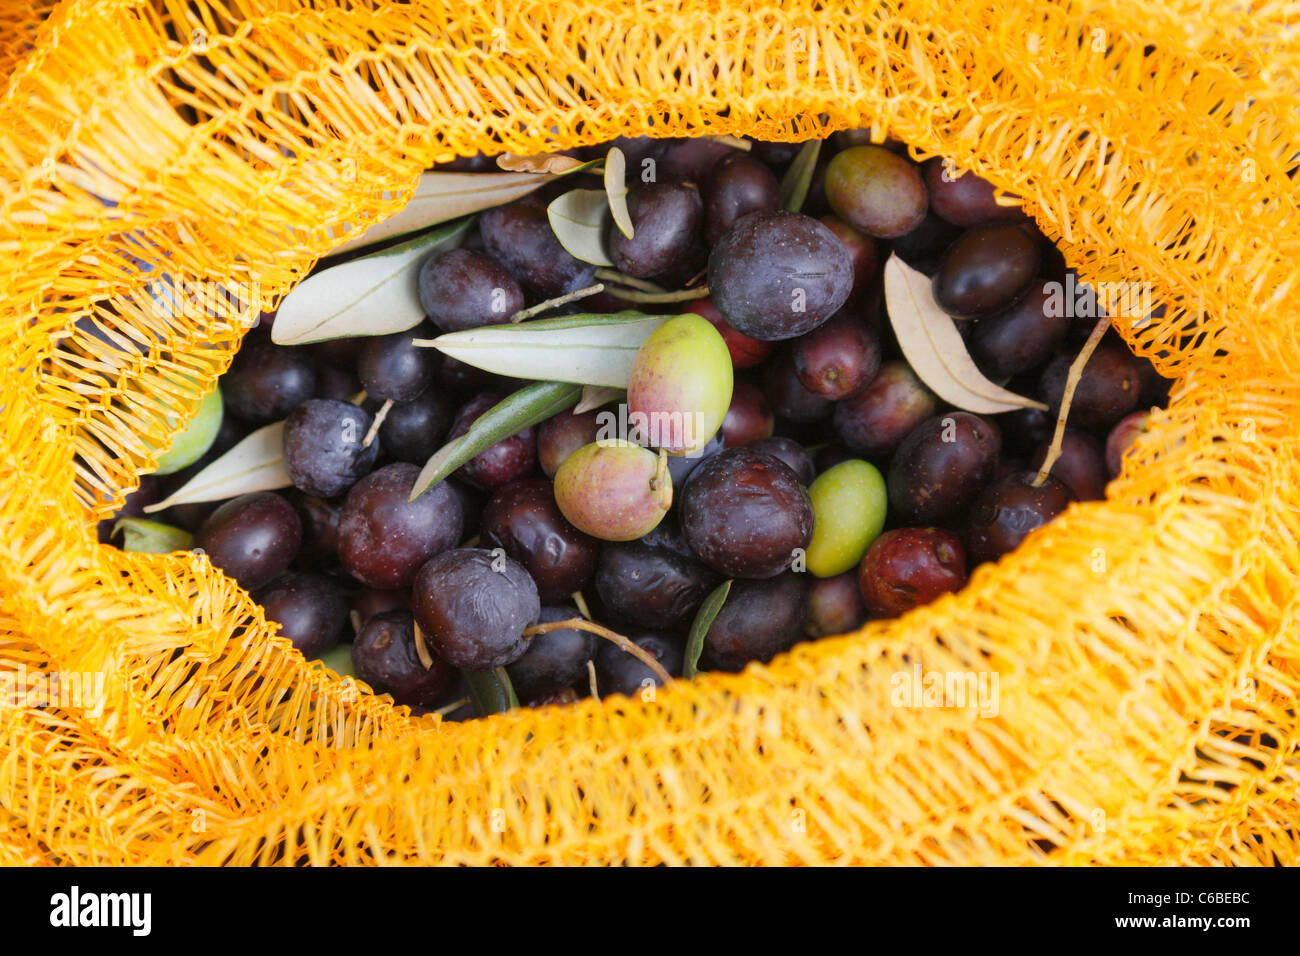 Black olive in yellow bag Stock Photo